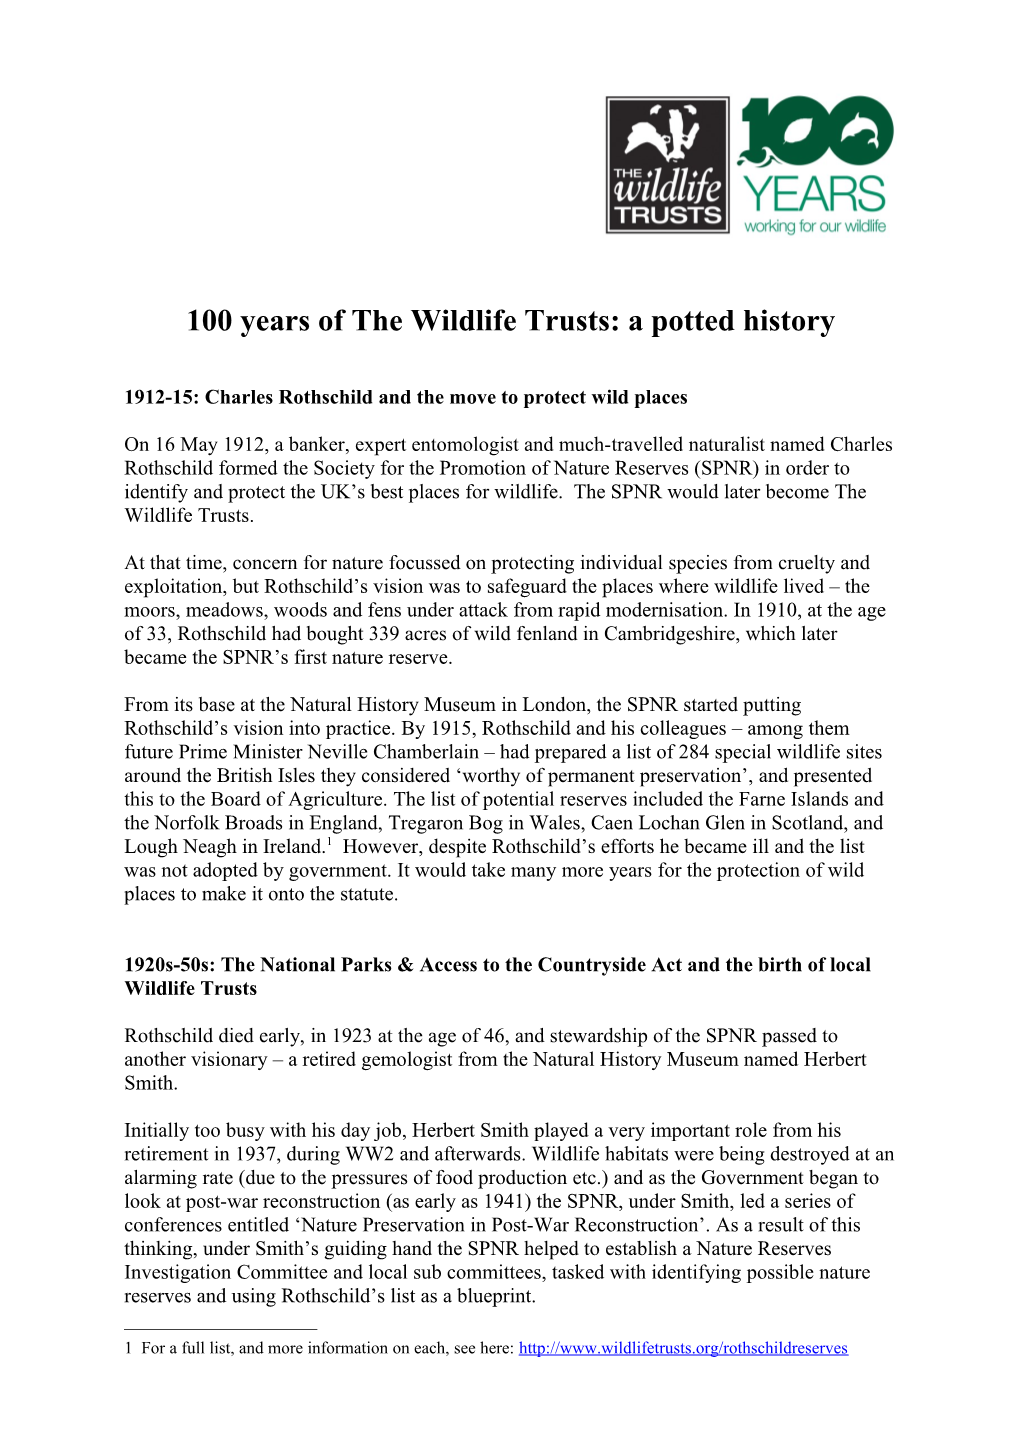 100 Years of the Wildlife Trusts: a Potted History